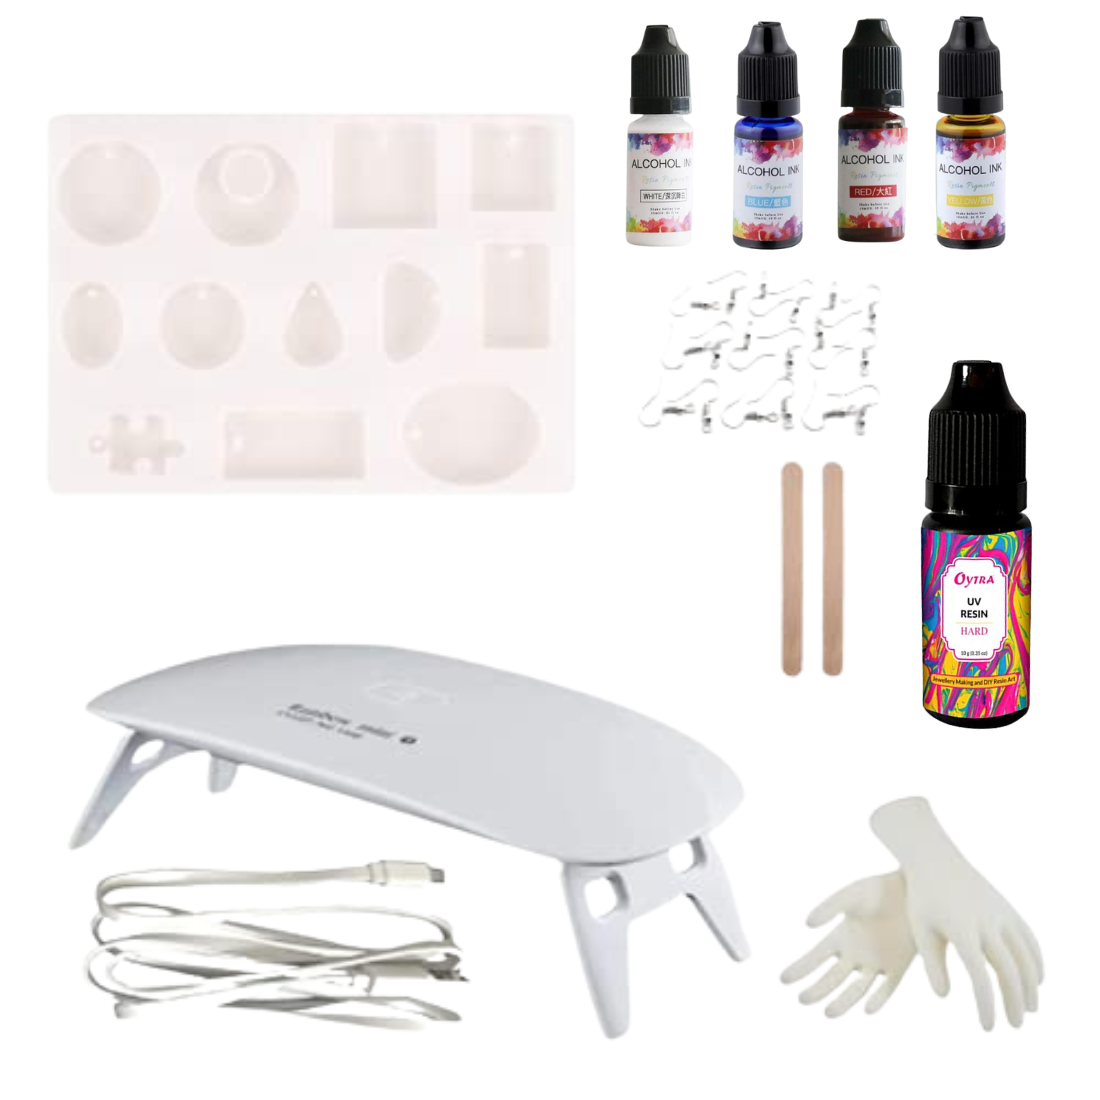 10g UV Resin Soft and UV Lamp Combo - Oytra